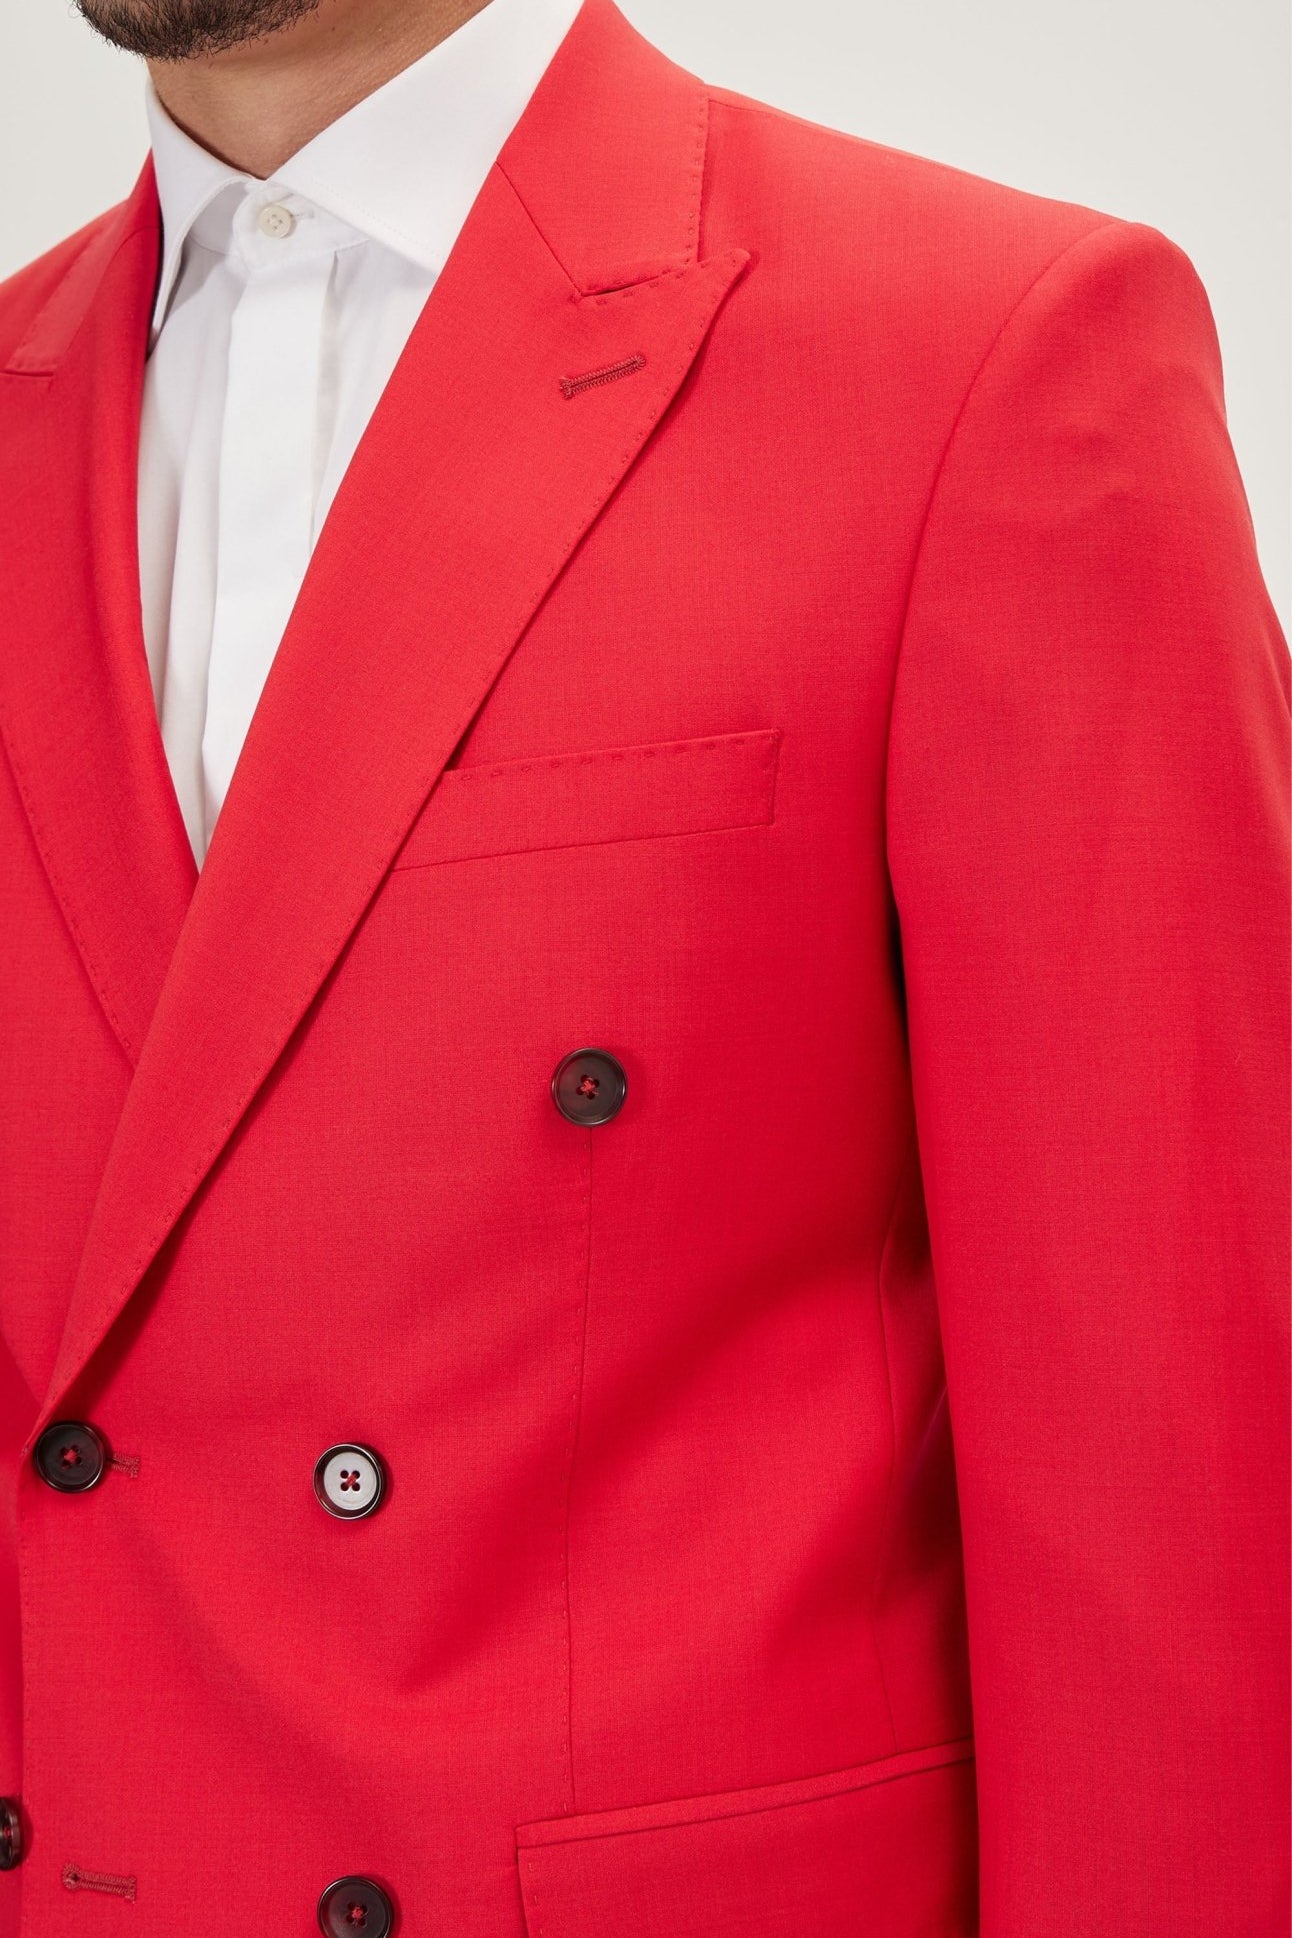 Super 120S Merino Wool Double Breasted Suit - Valentine Red - Ron Tomson